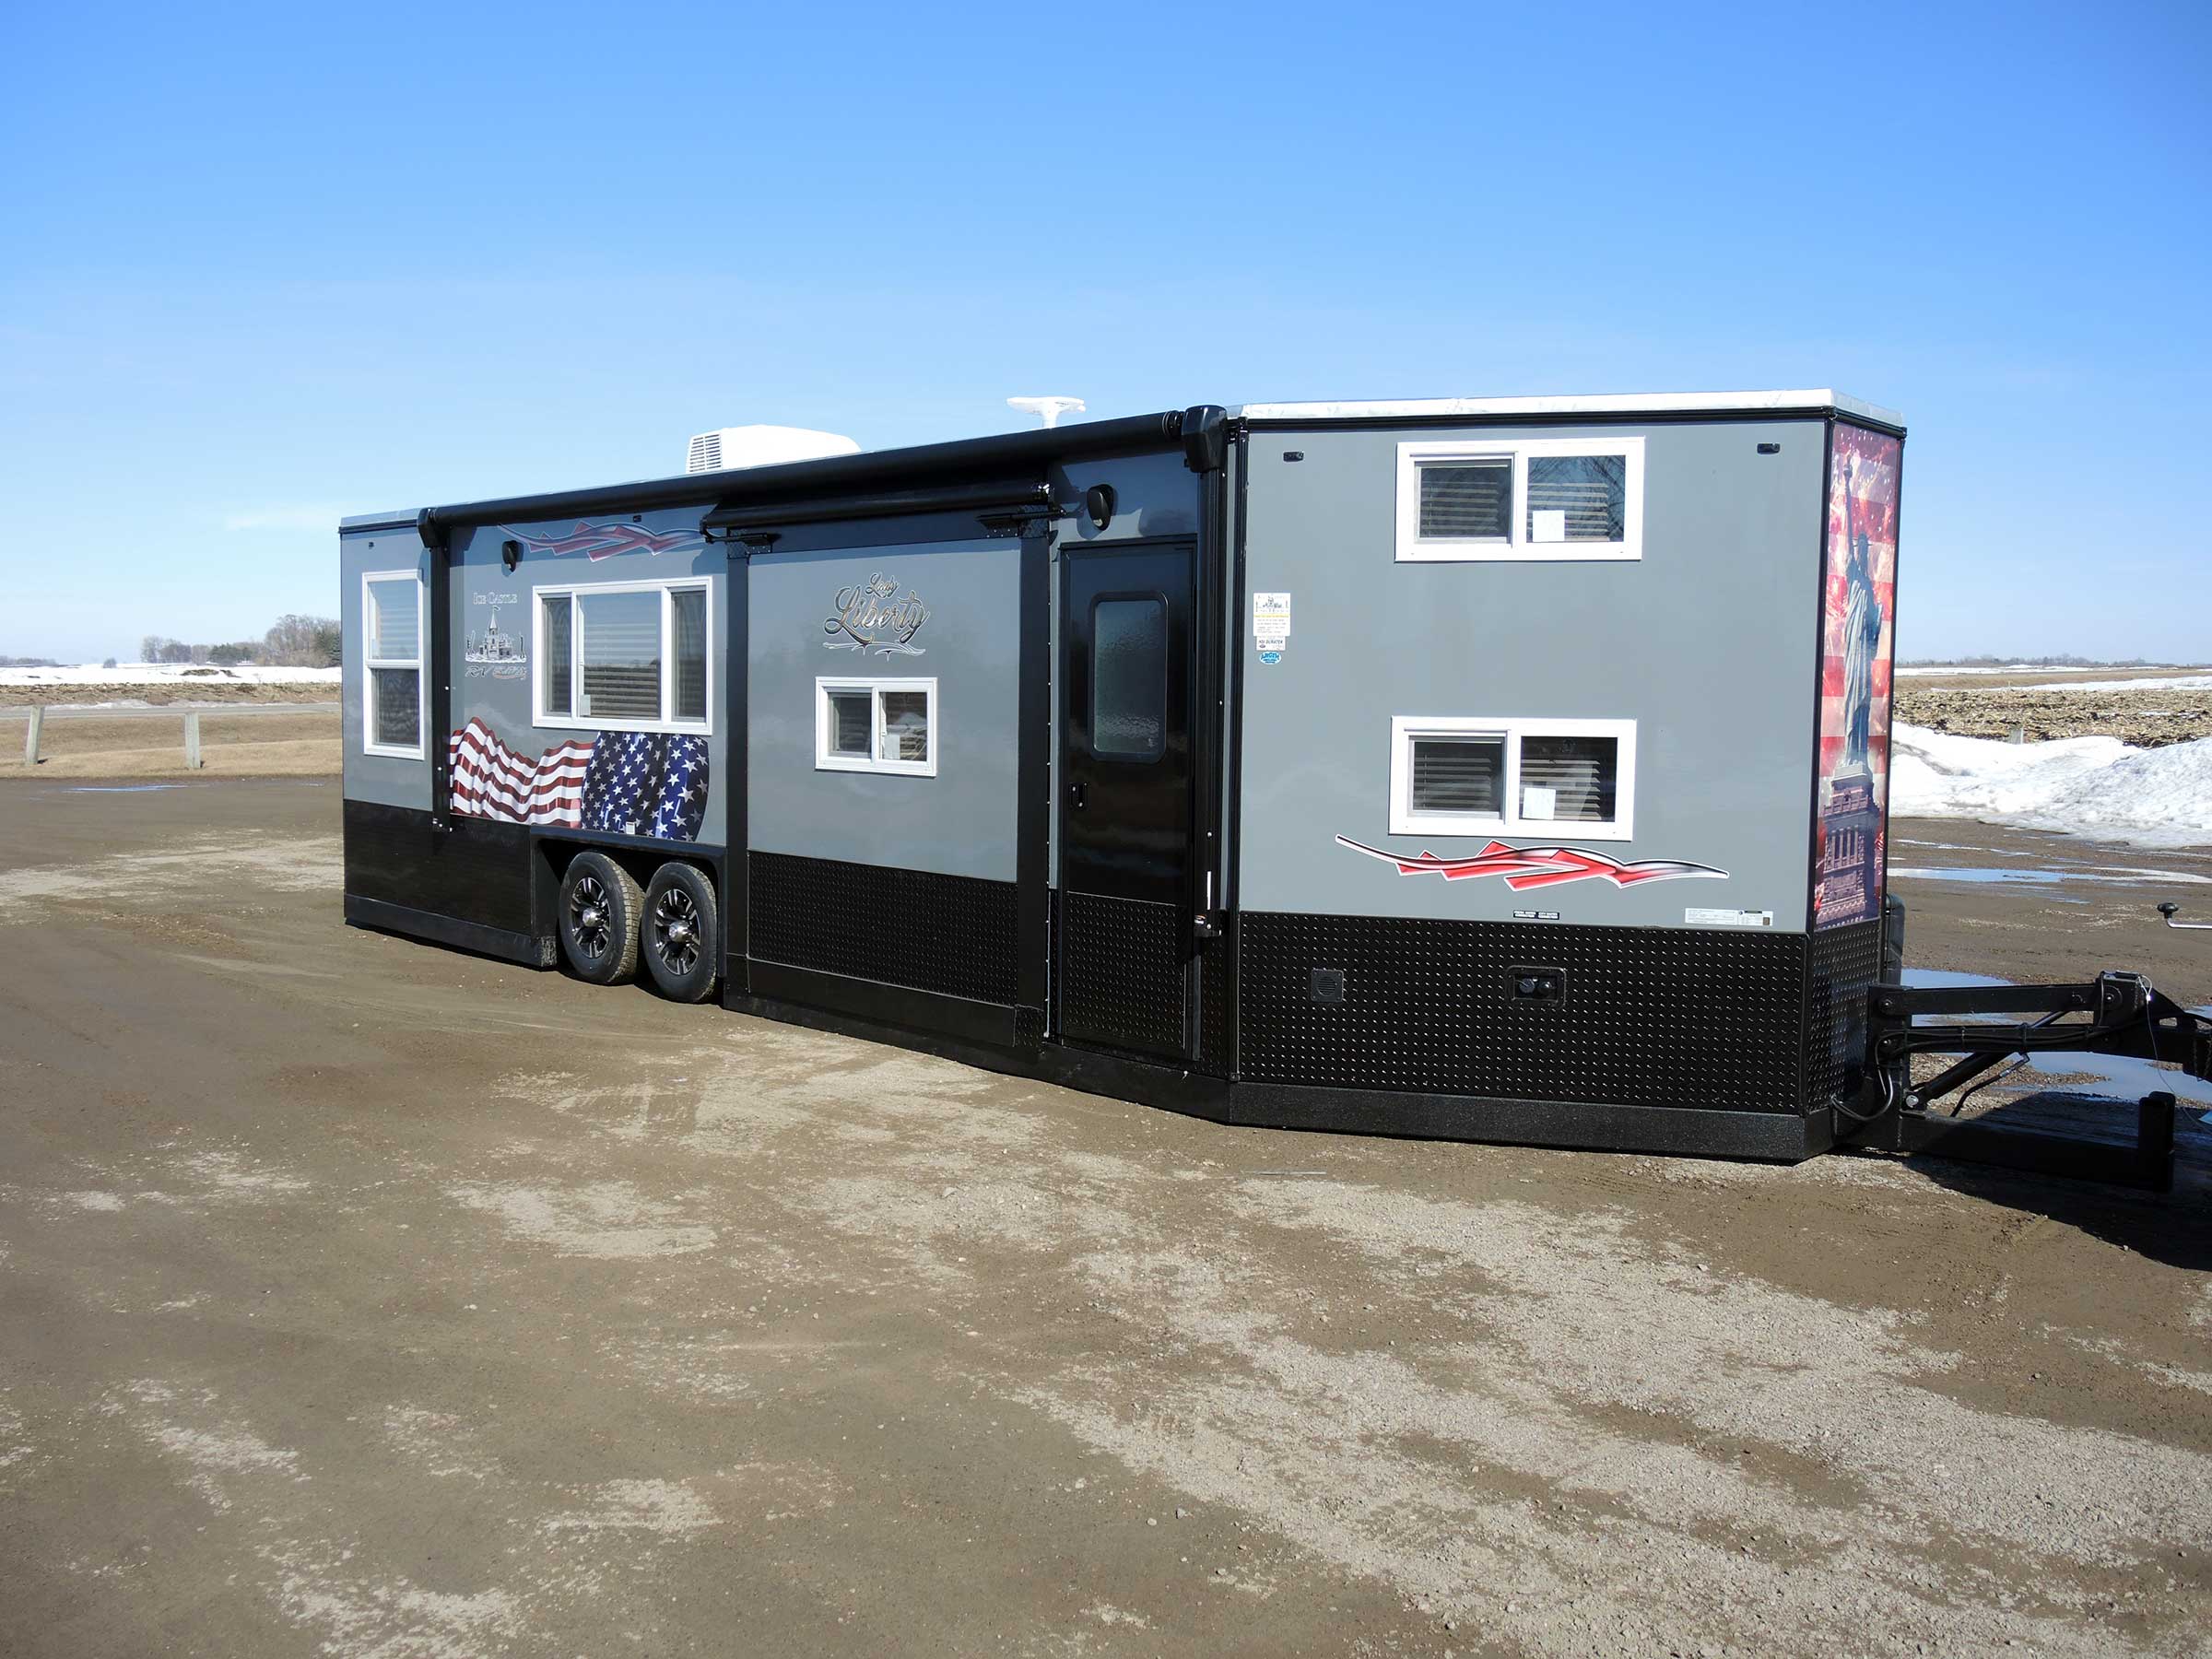 Lady Liberty RV for Sale | Rugged RVs for Sale | Exterior